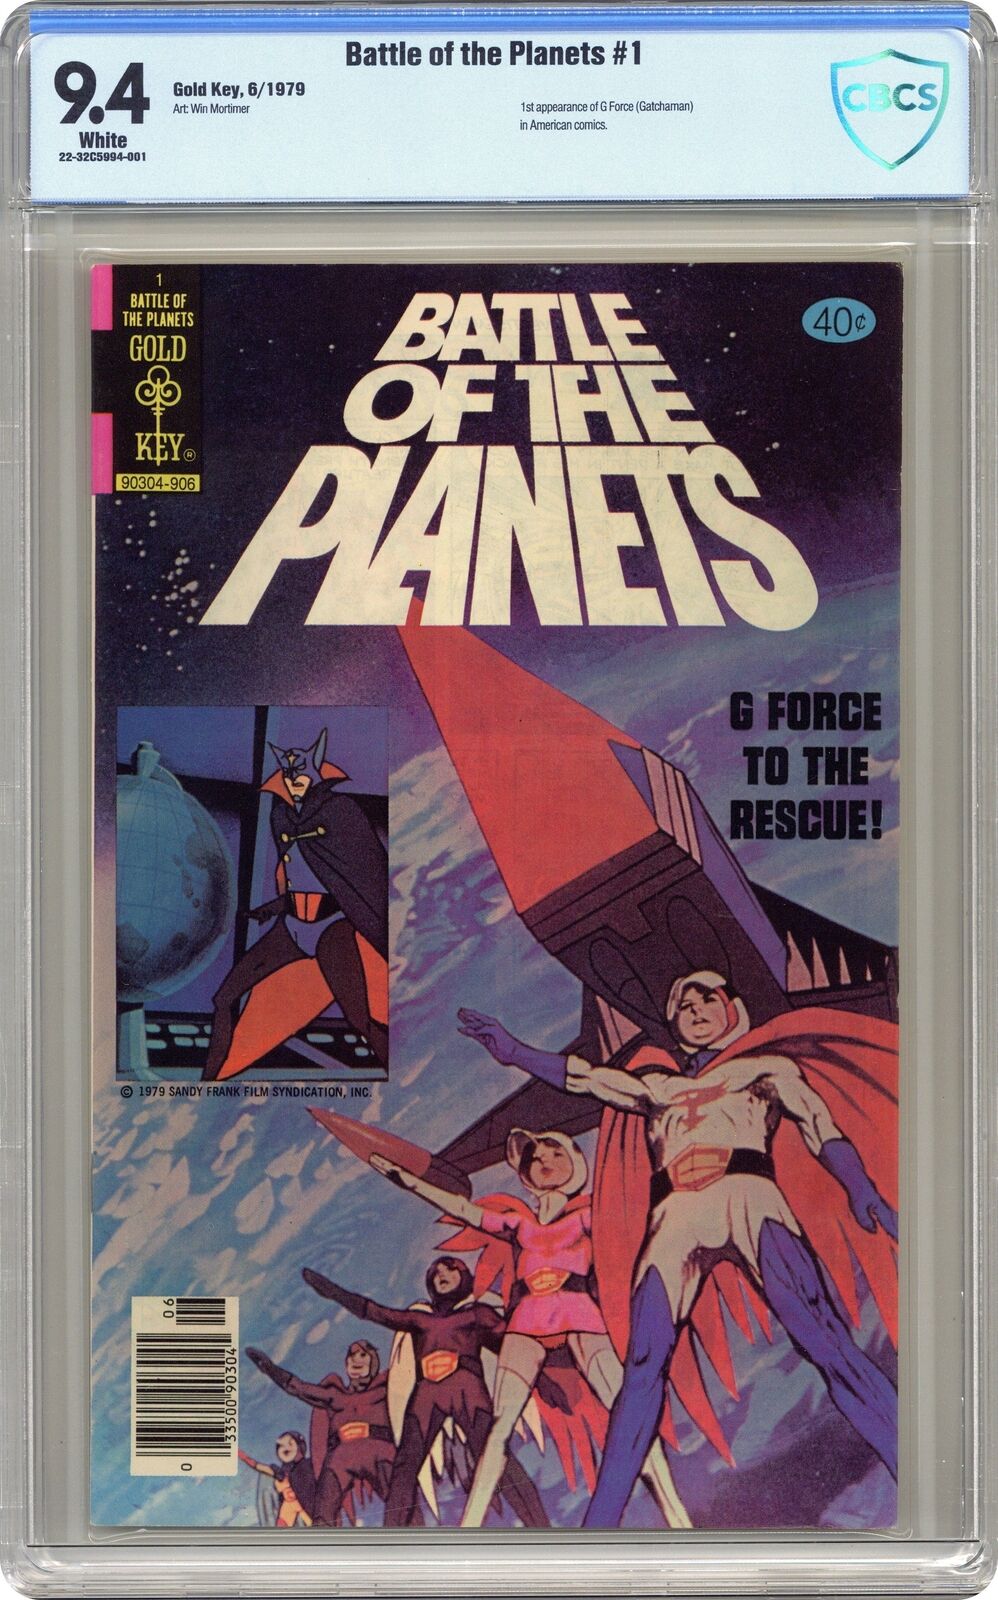 Battle of the Planets #1 CBCS 9.4 1979 Gold Key 22-32C5994-001